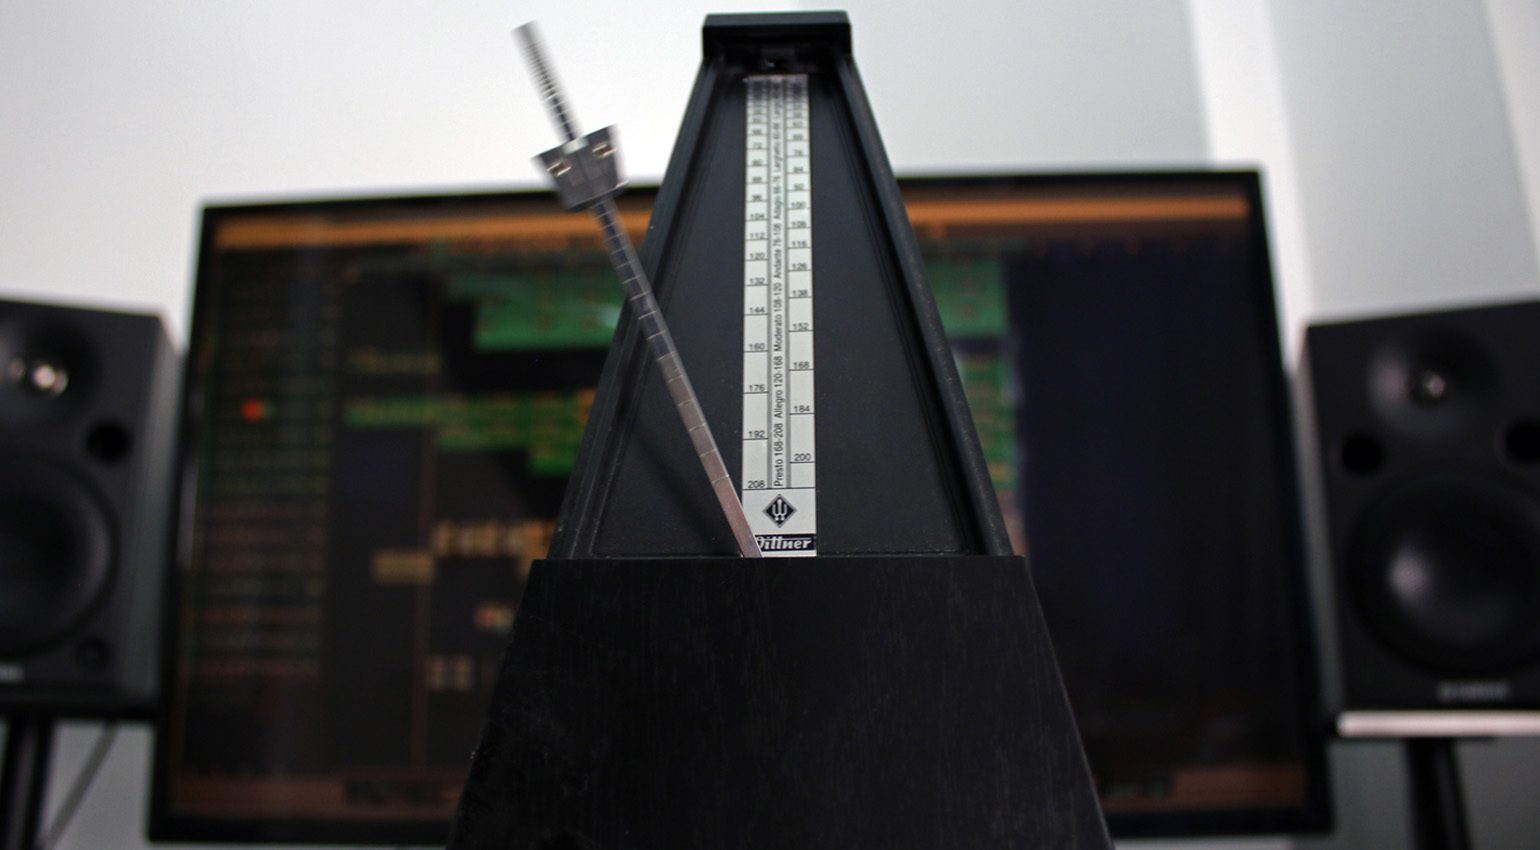 Practice with a metronome